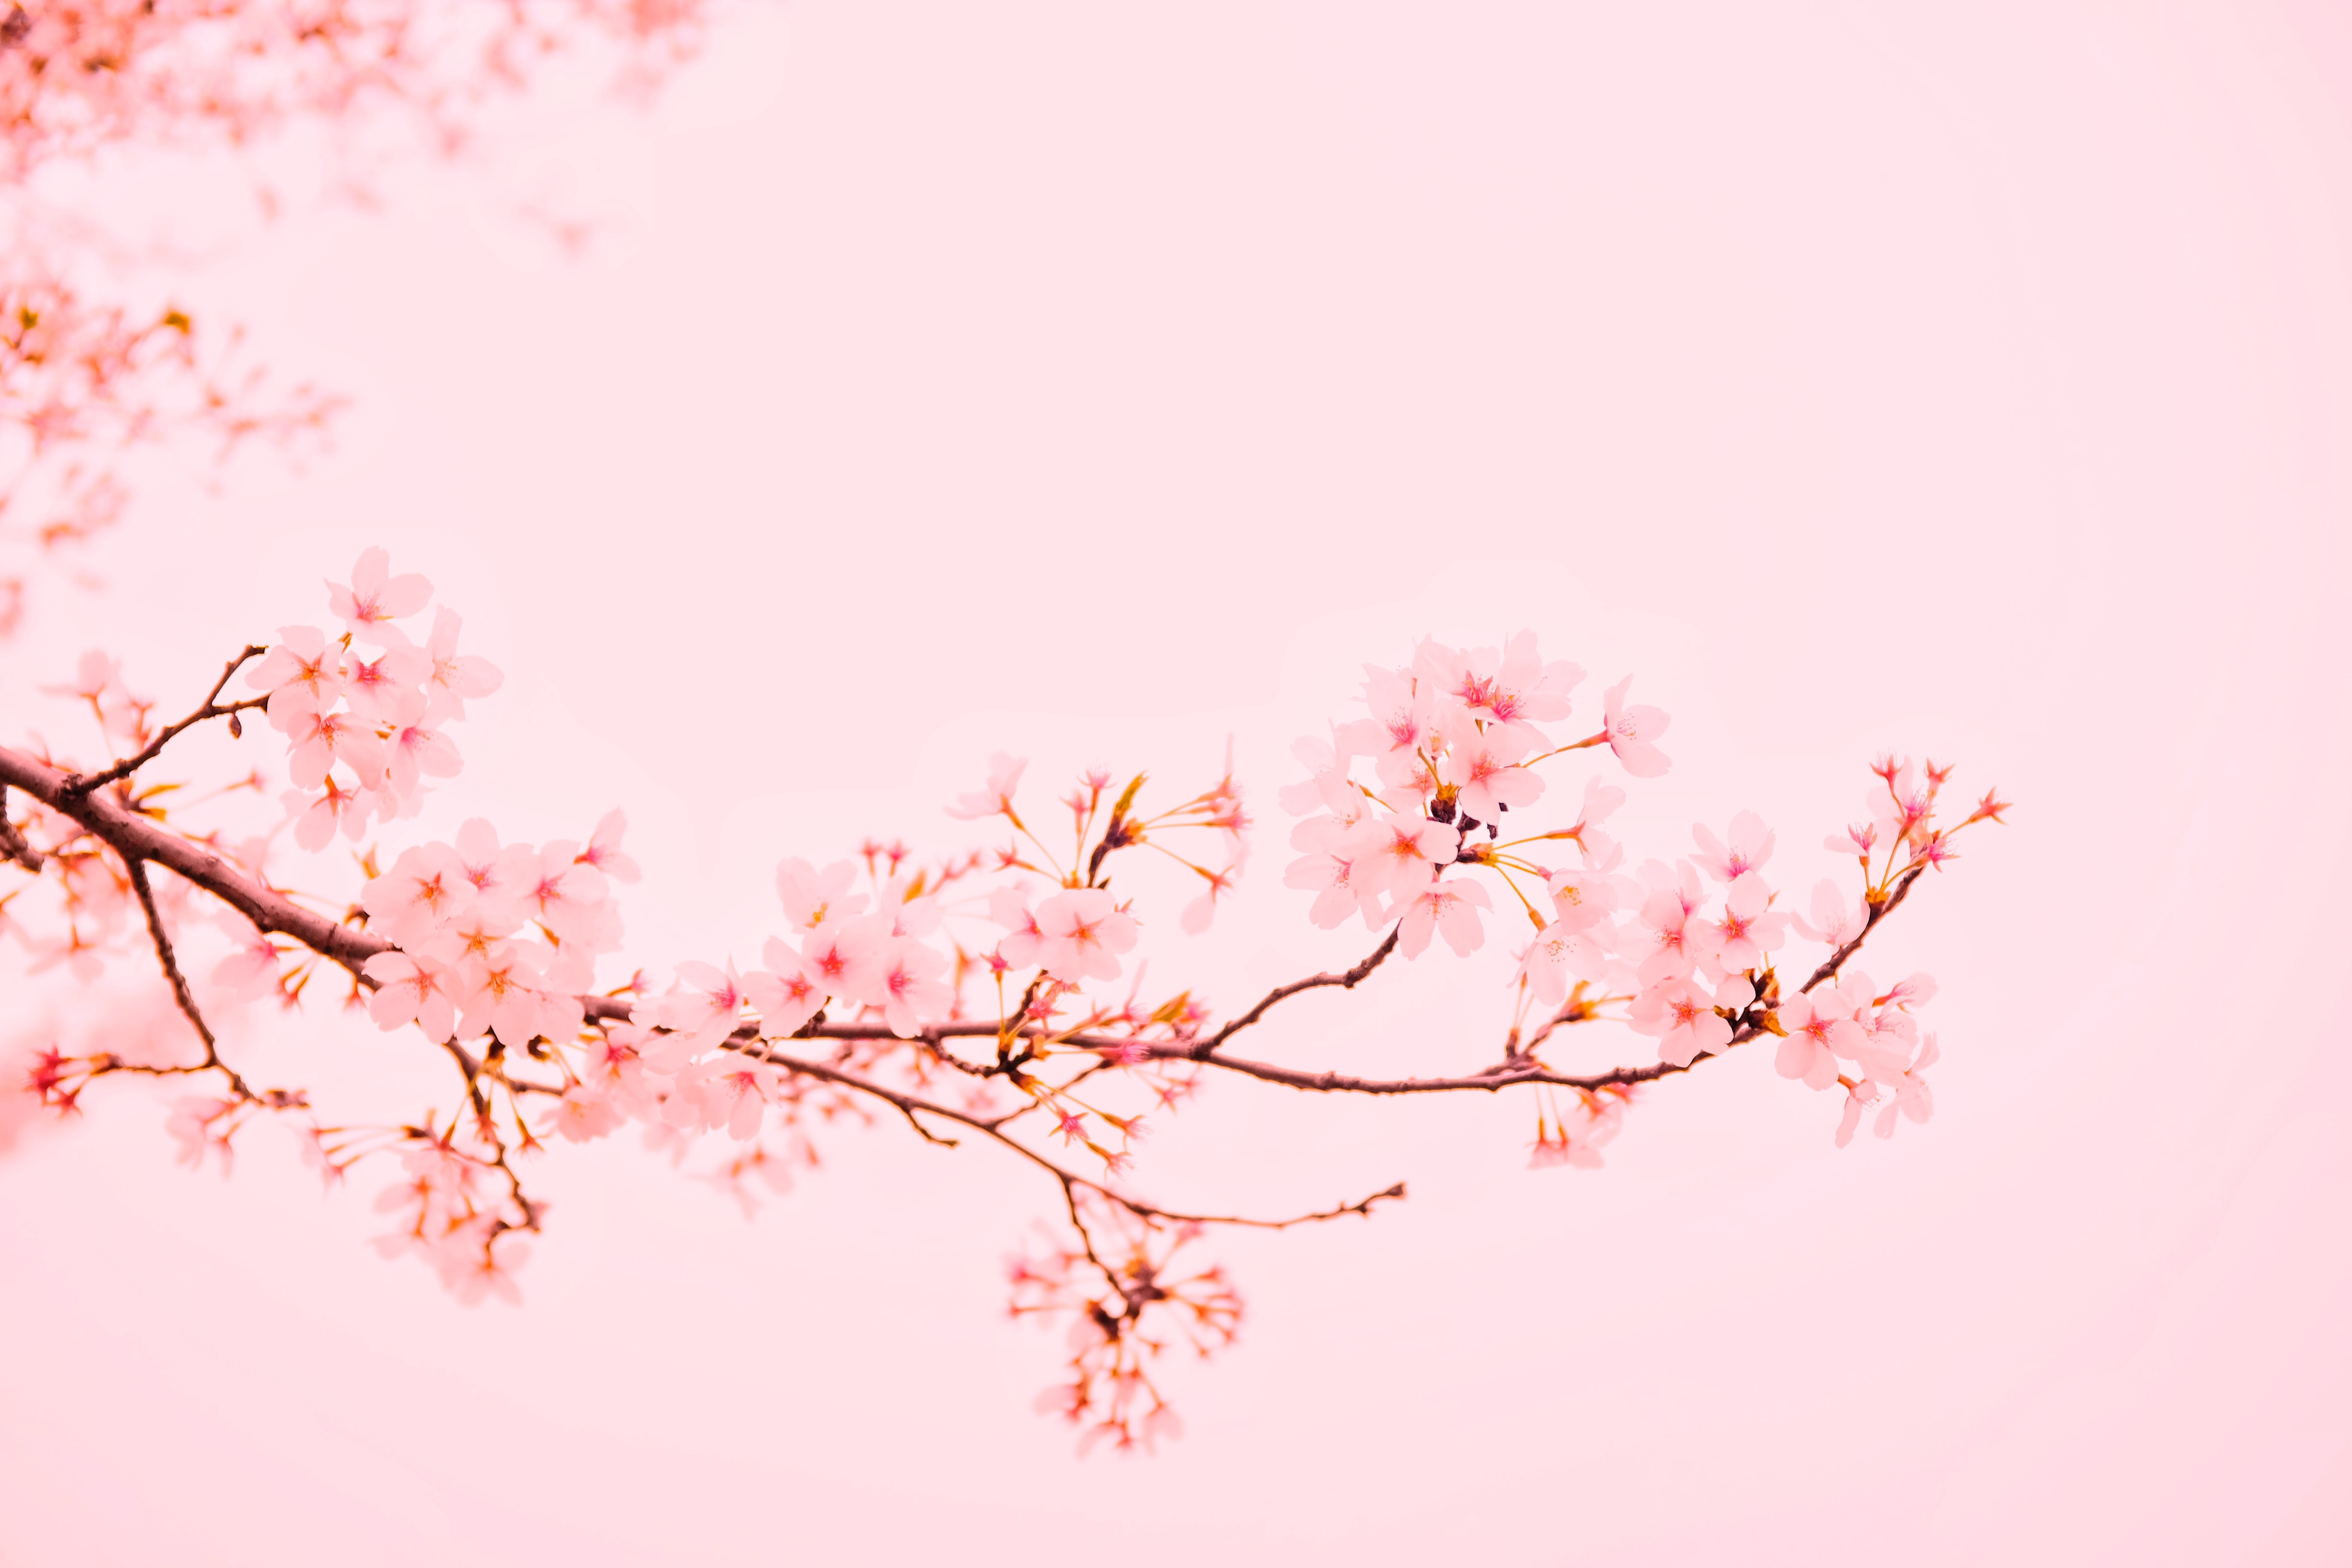 a_branch_with_pink_flowers_01.jpg